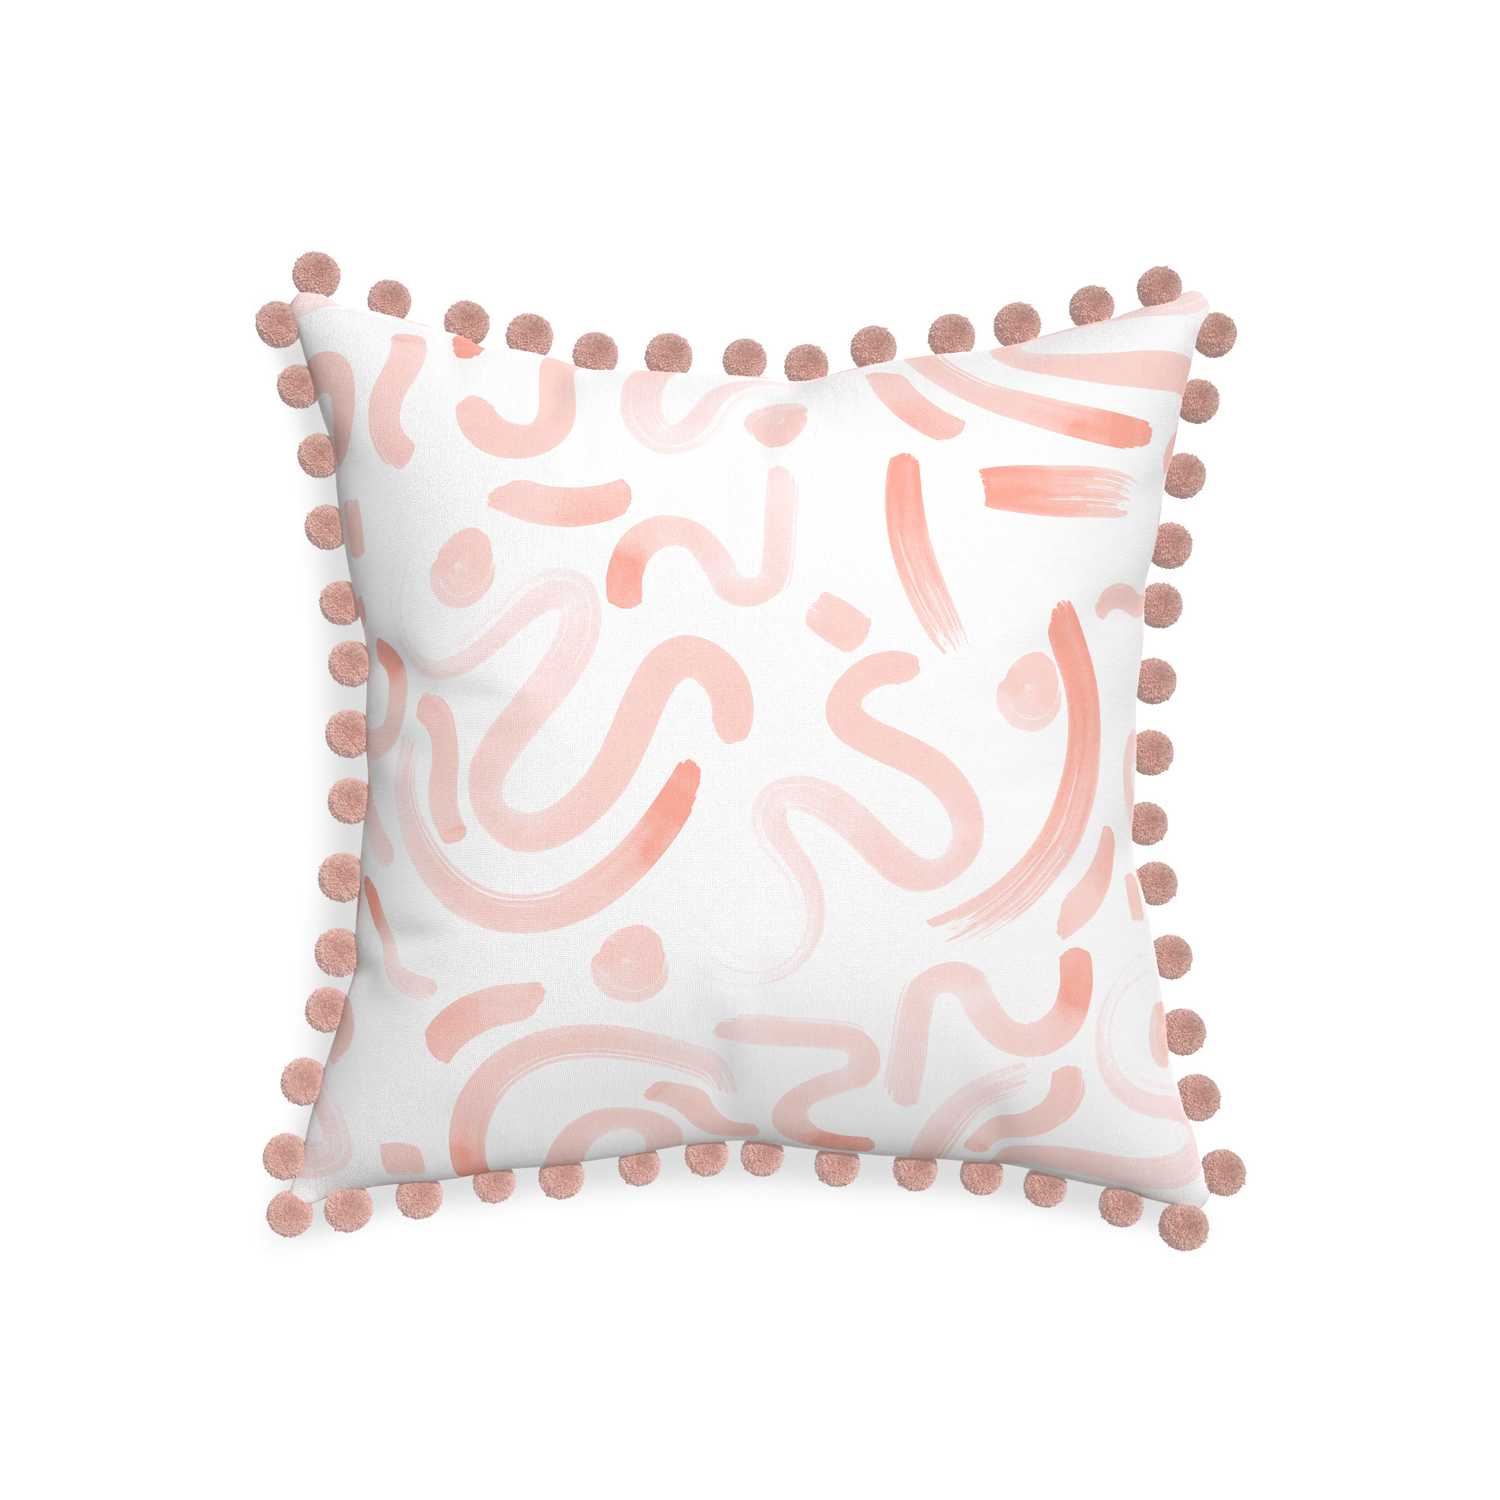 20-square hockney pink custom pink graphicpillow with rose pom pom on white background